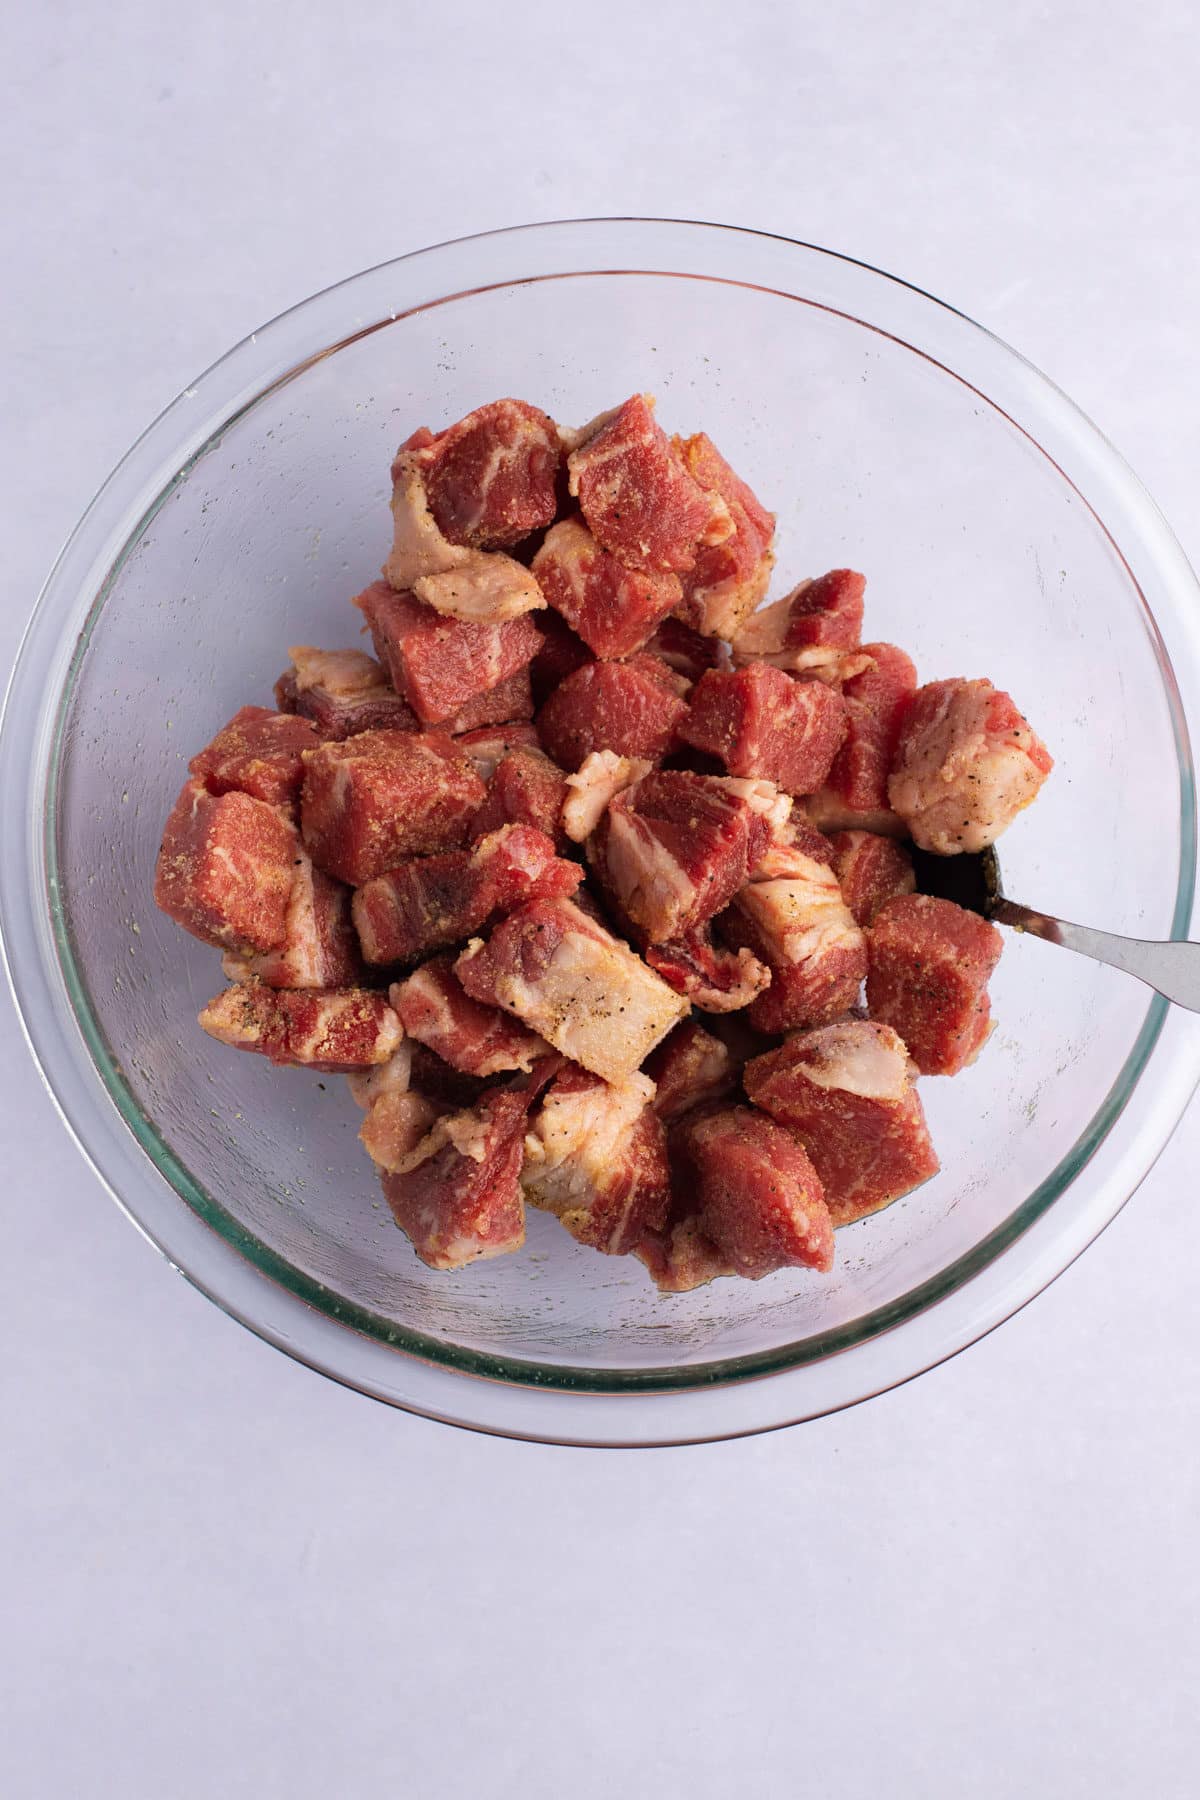 Cubes of raw steak in a bowl with oil and seasonings.